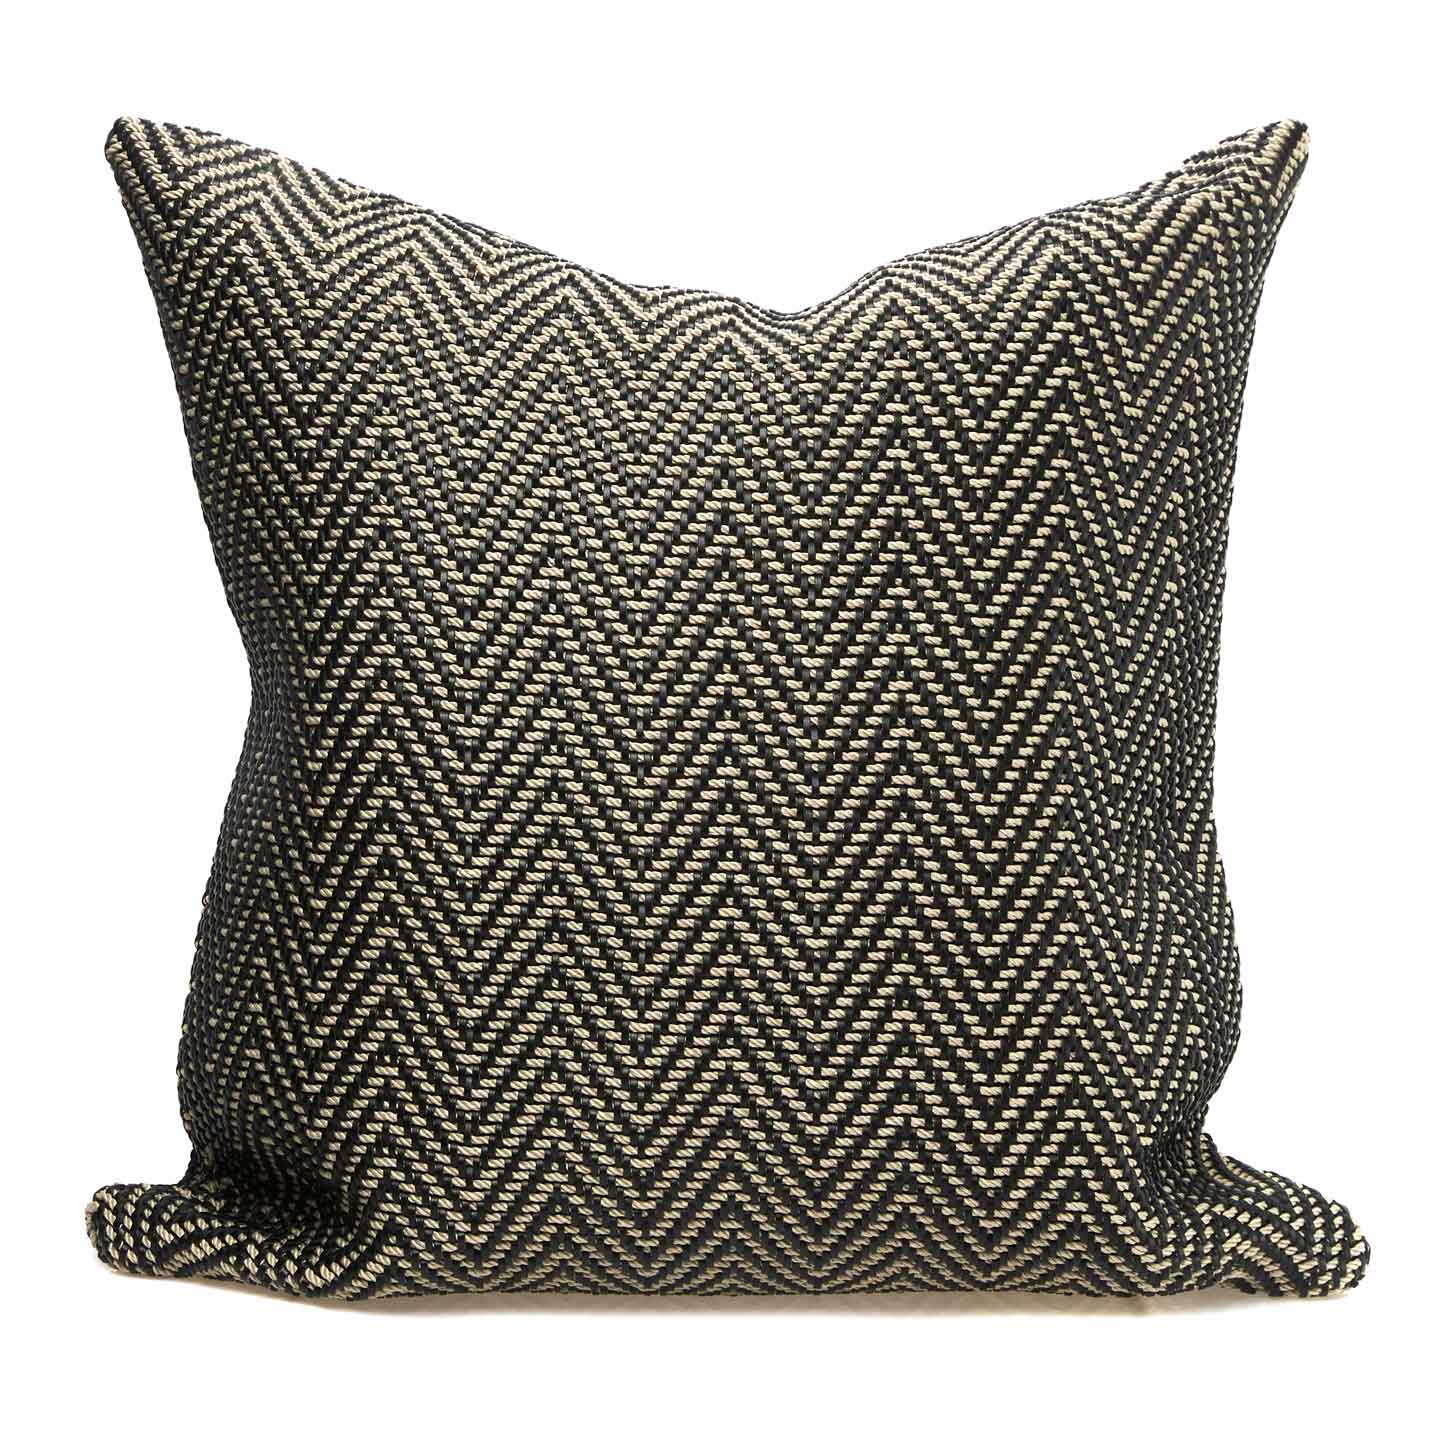 The Linda pillow by Beau Home